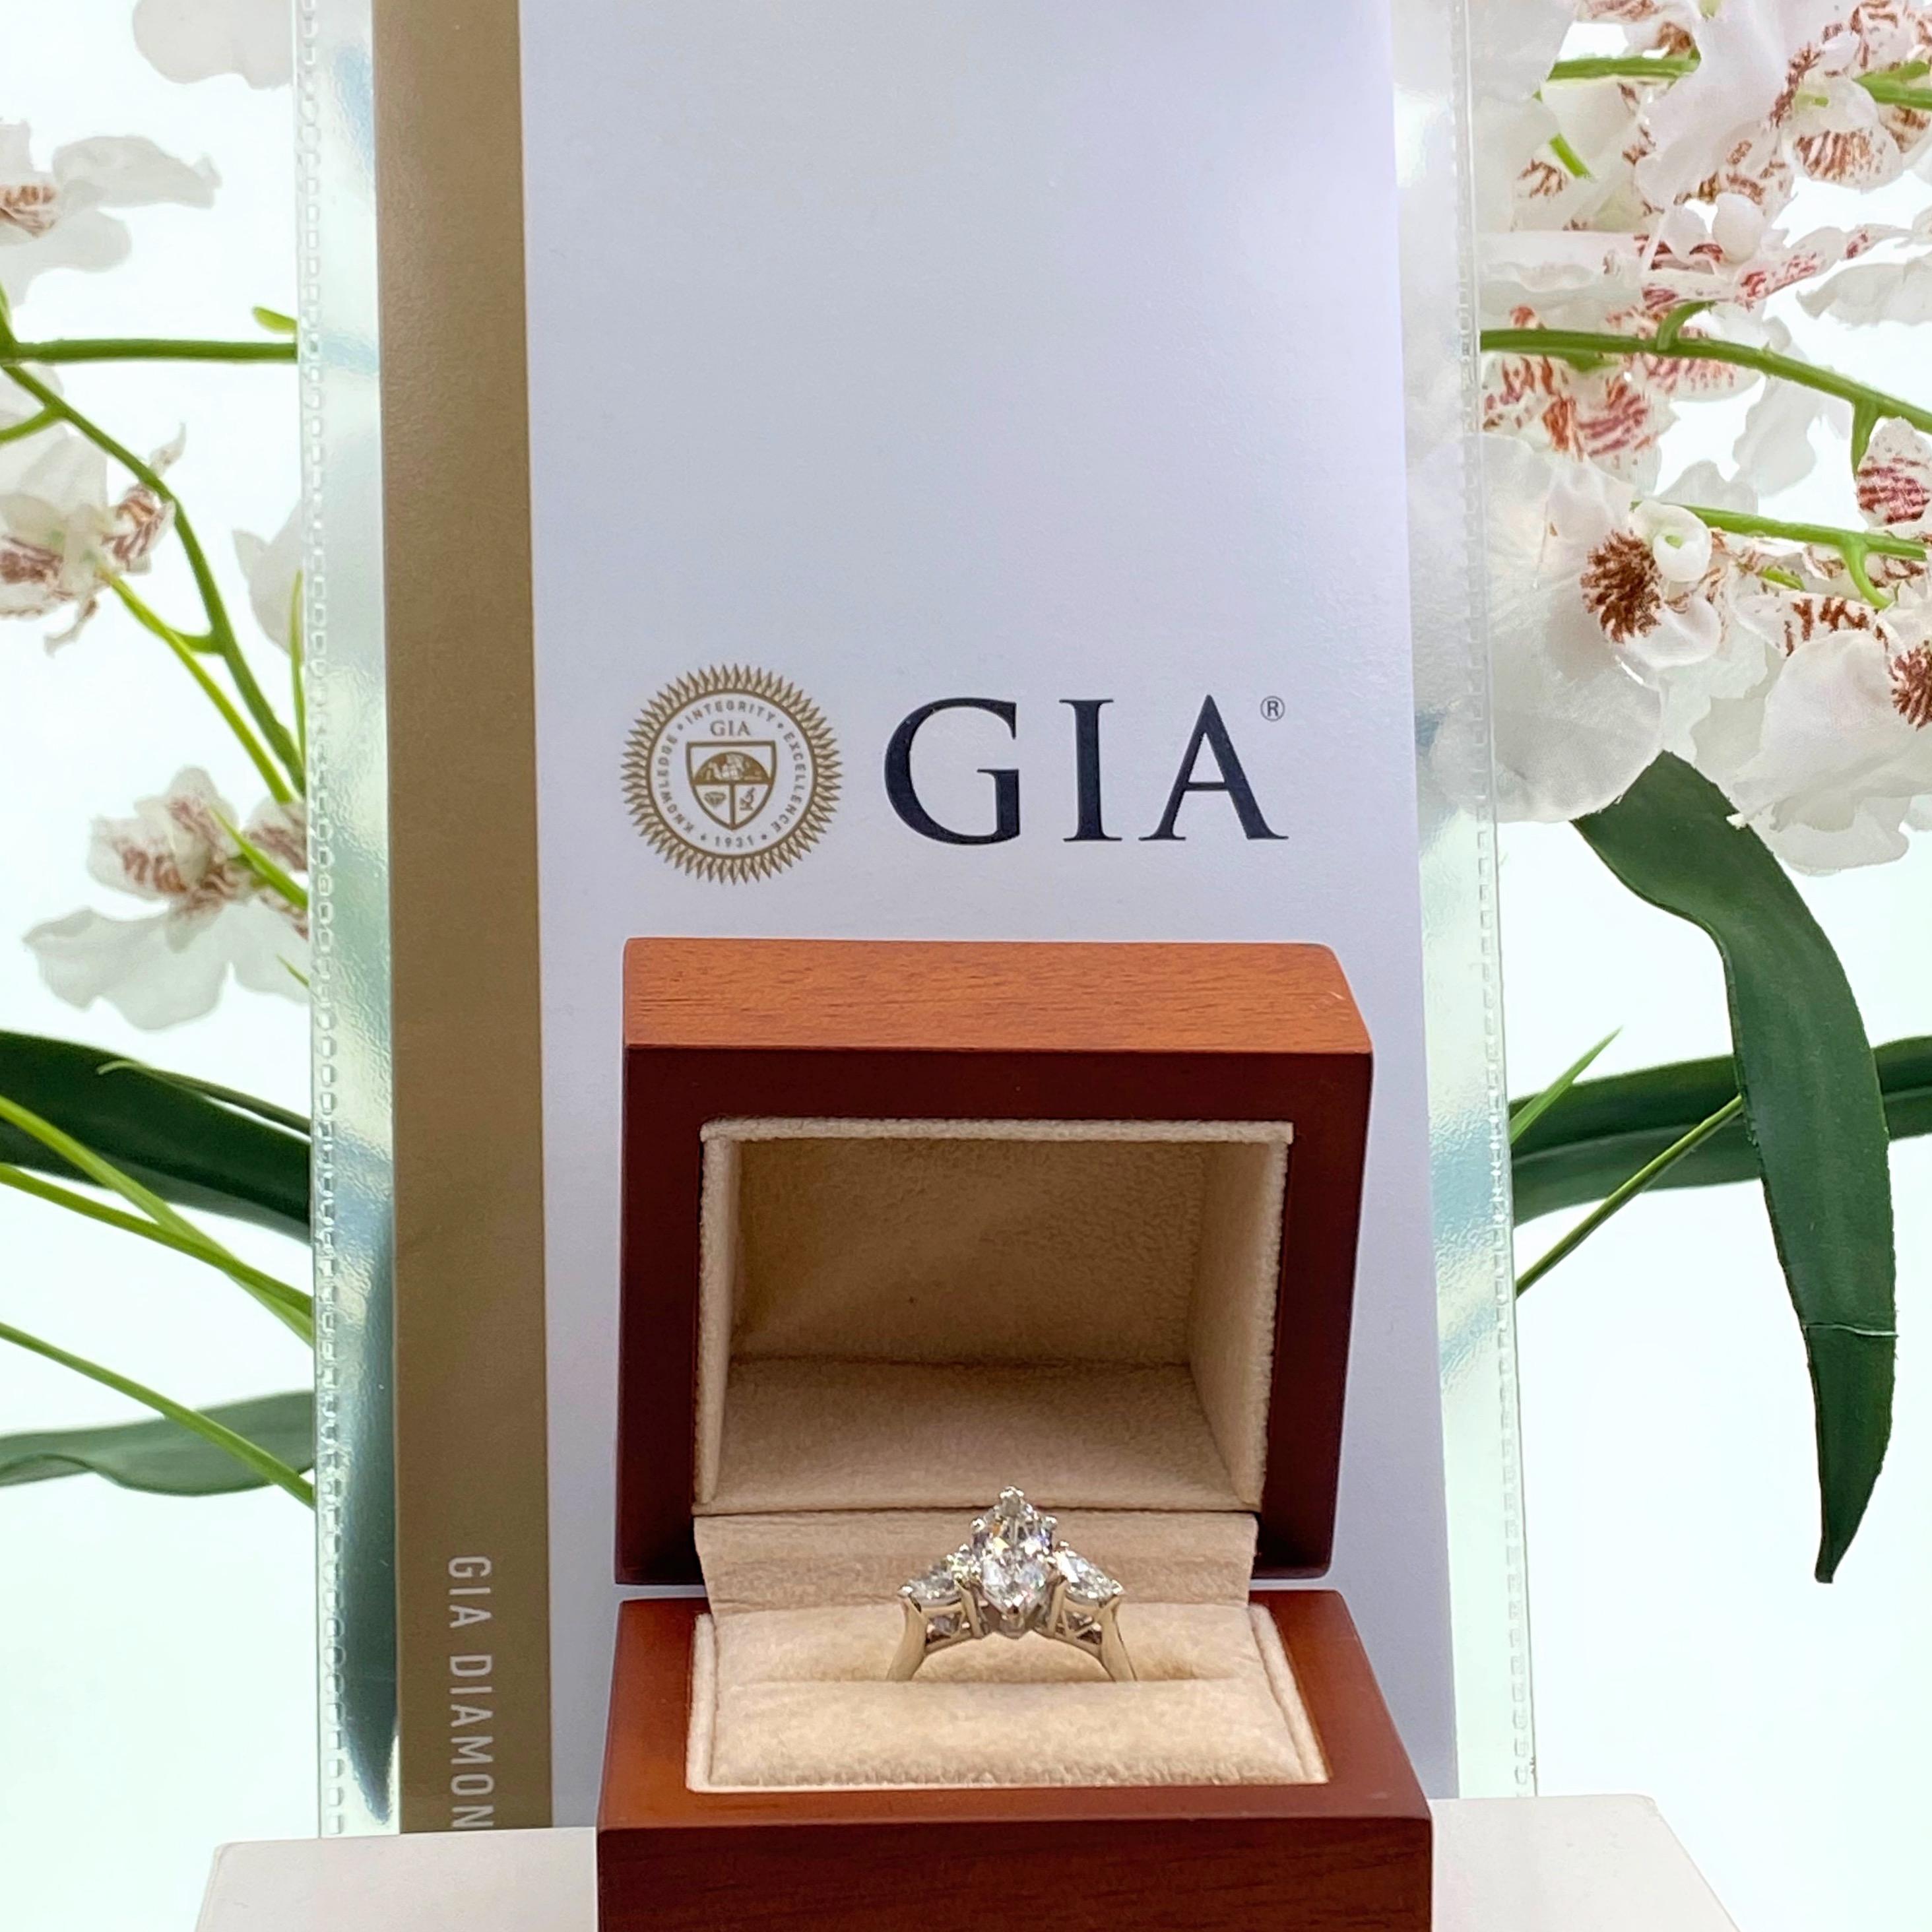 Antique Marquise Diamond Ring
Style: 3-Stone Engagement Ring
GIA Report number: 2211094578
Metal:  Platinum
Size / Measurements:  Ring Size 7, sizable
TCW:  2.56 Carats
Main Diamond: 1.96 Carat Antique Marquise Brilliant
Color & Clarity:  G color,